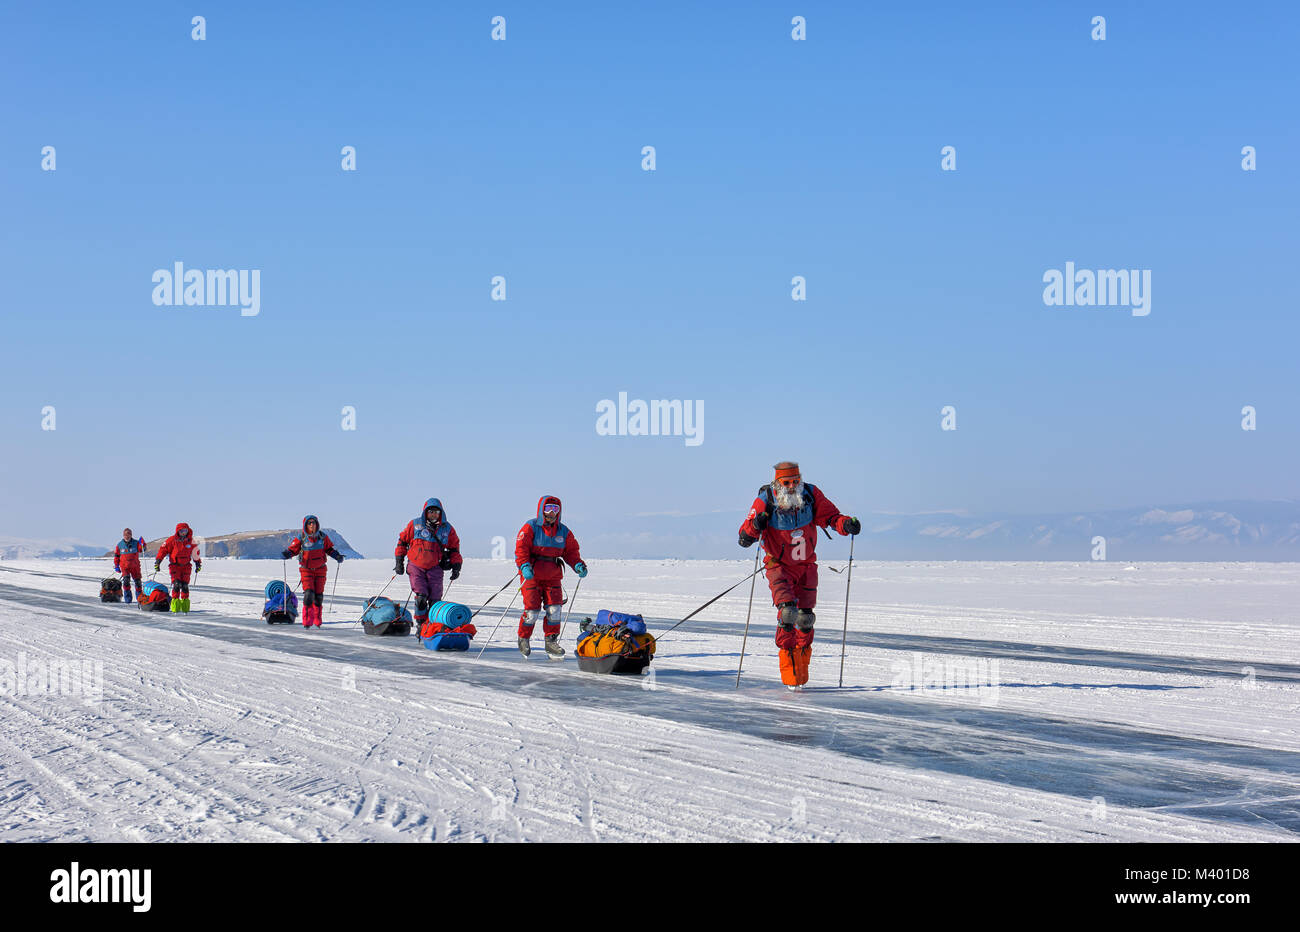 LAKE BAIKAL, IRKUTSK REGION, RUSSIA - March 08, 2017: Expedition on ice of Baikal to test Arctic equipment in low temperature conditions. A group of r Stock Photo